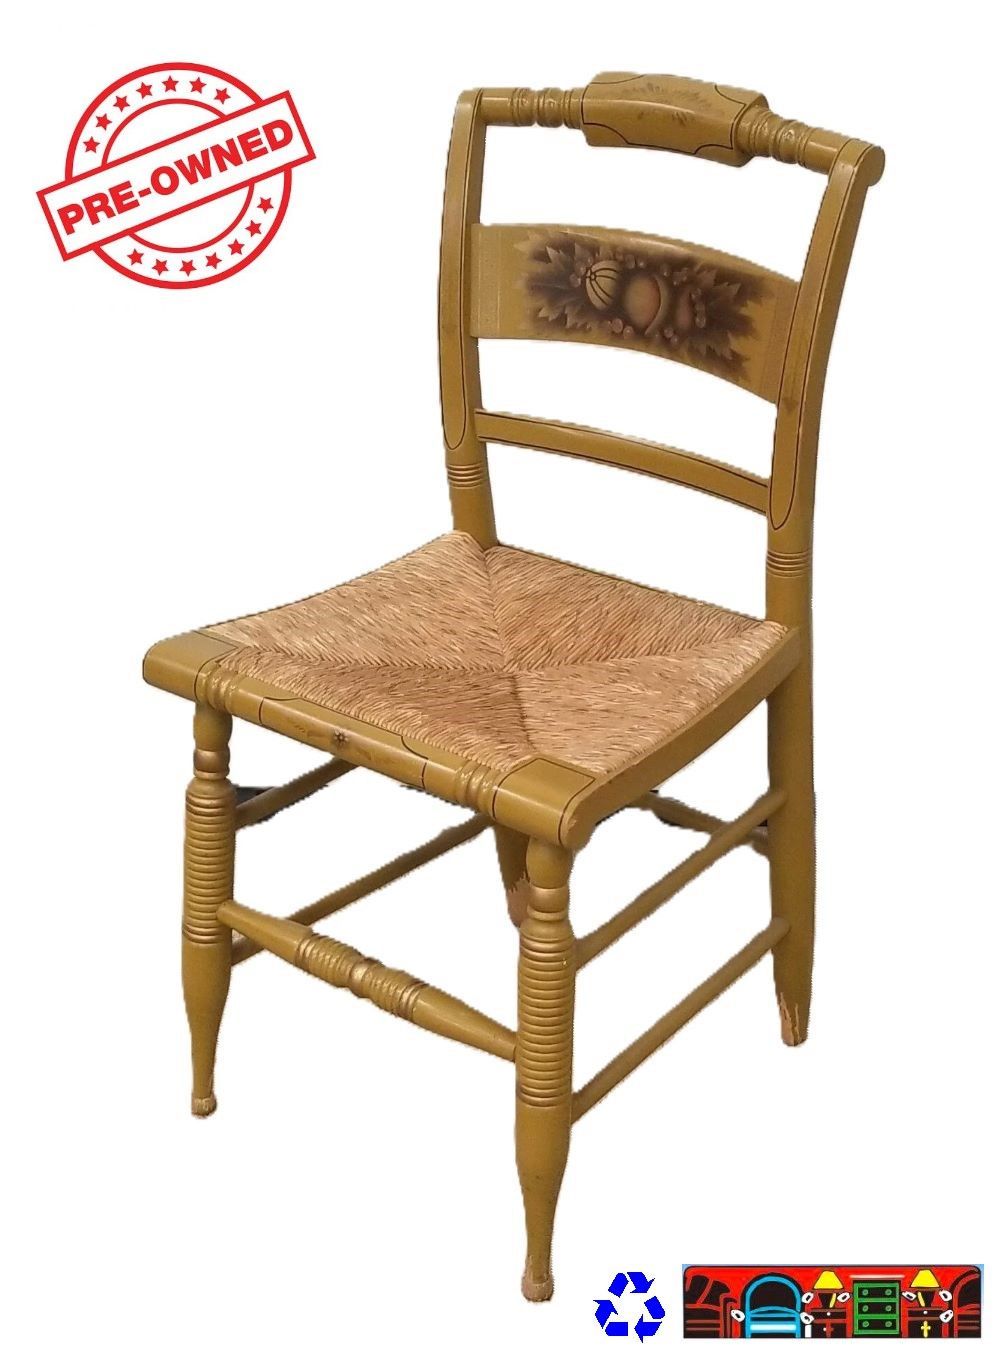 A vintage Hitchcock child's chair, featuring a wooden frame with a woven seat and hand-painted accents, is available at Bratz-CFW in Fort Myers, FL.